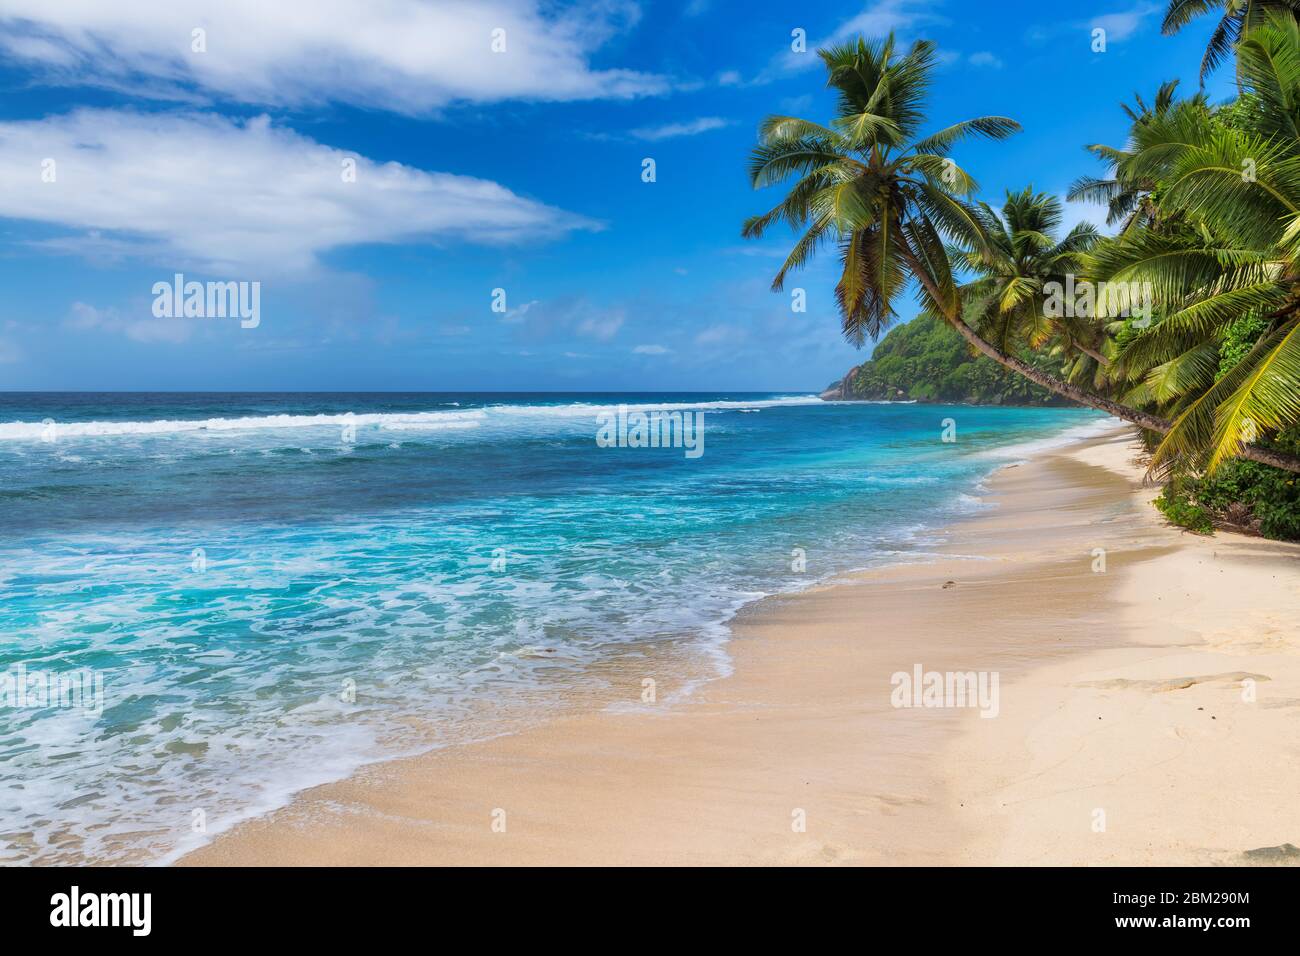 Palm trees on tropical beach summer vacation Stock Photo